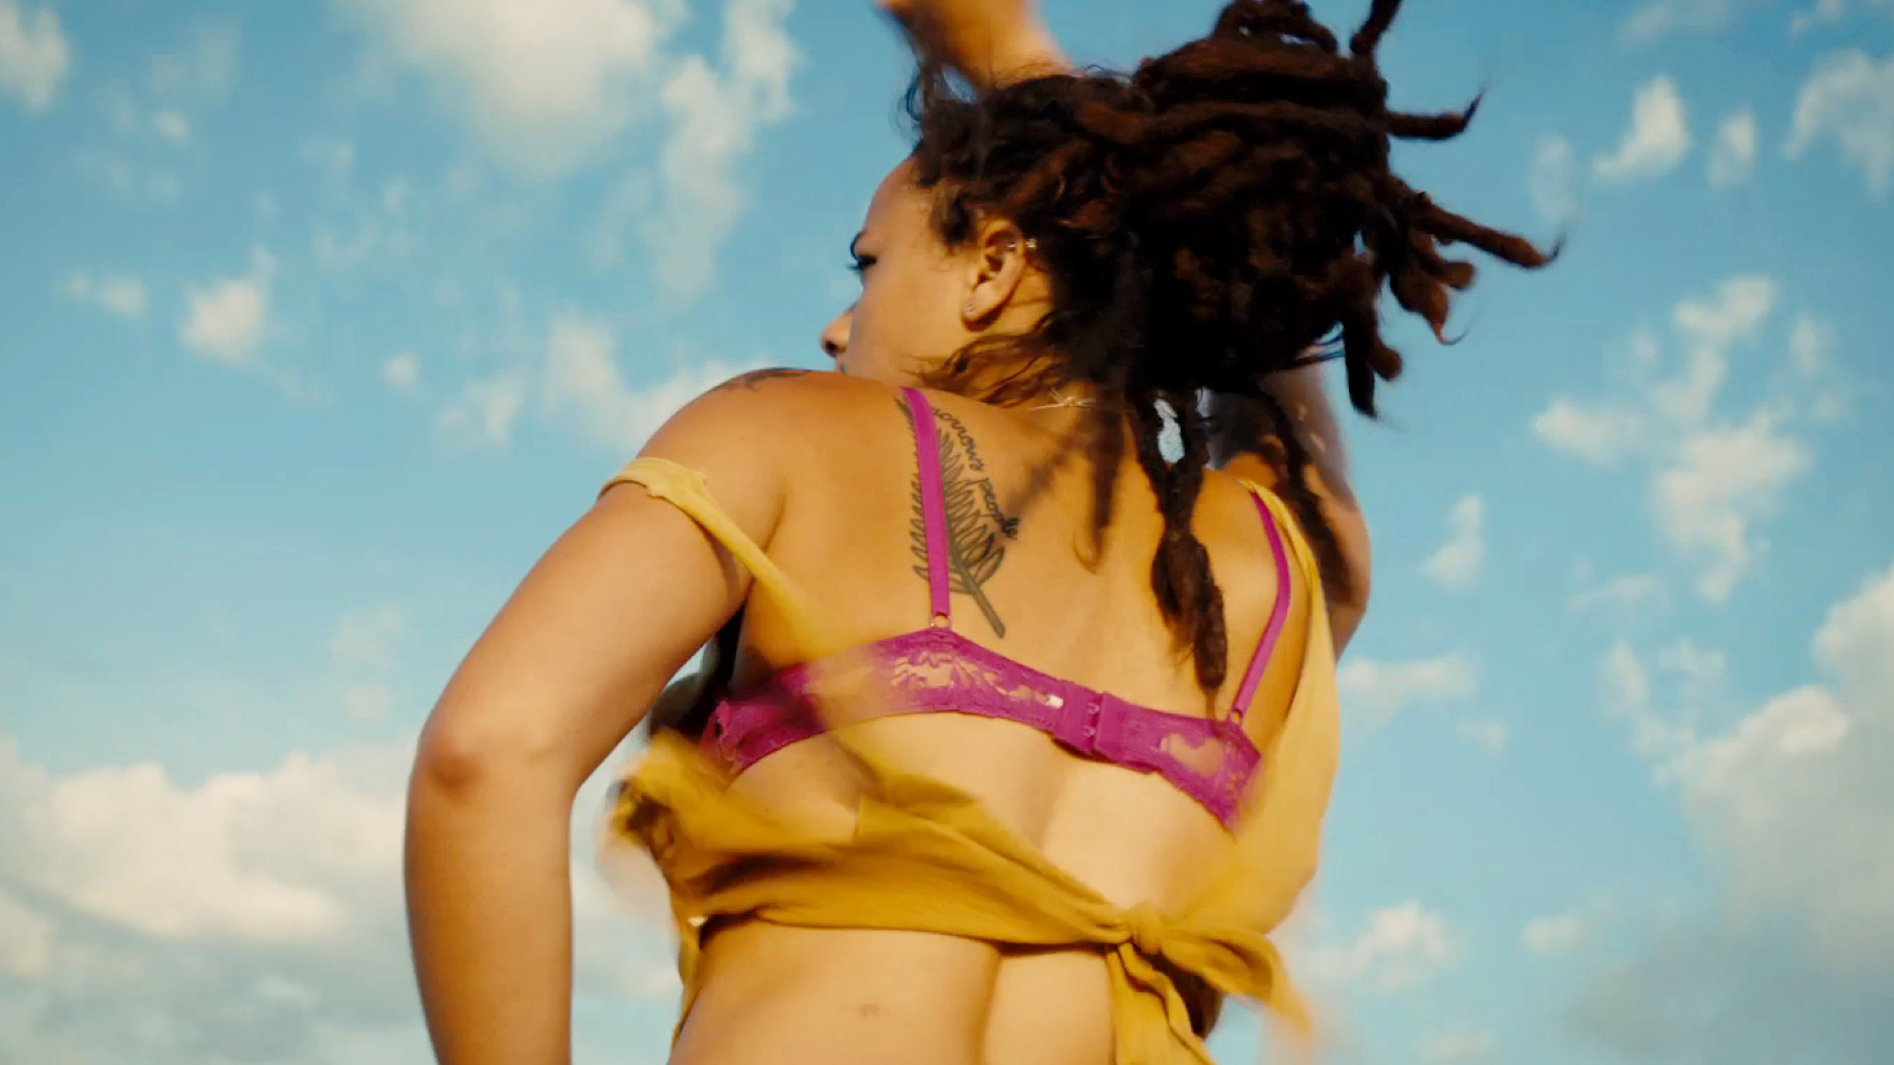 A still from the movie American Honey